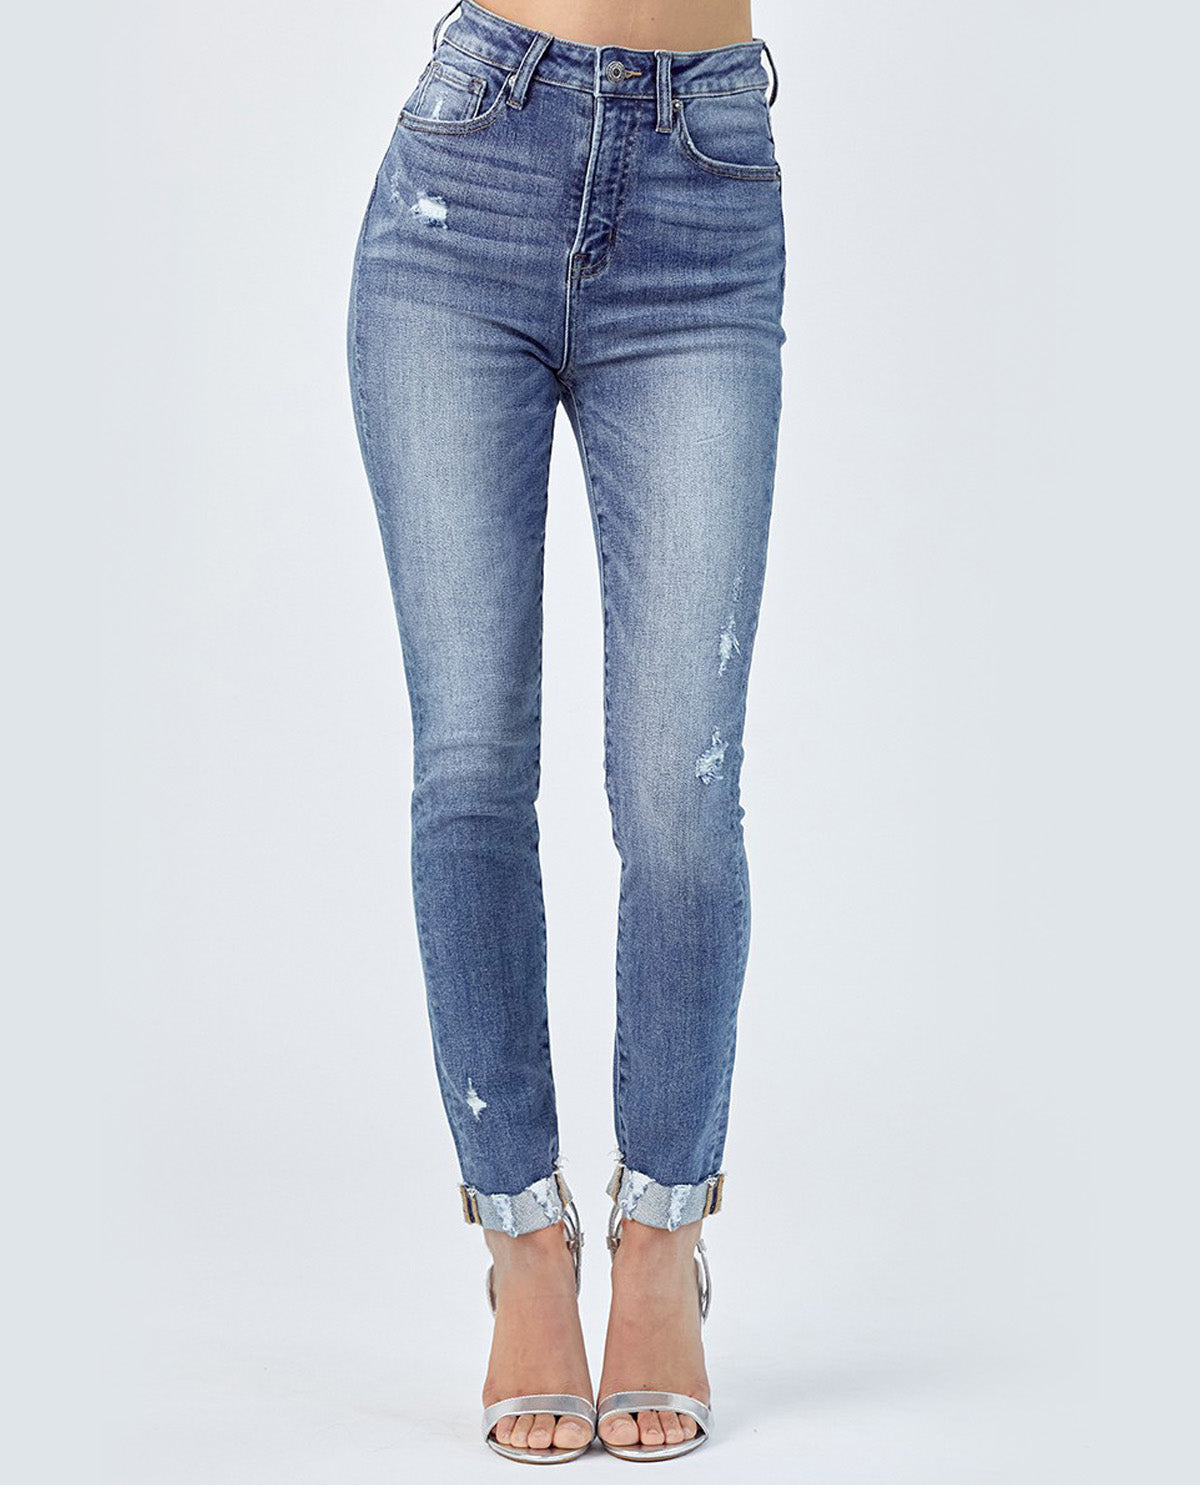 Risen High Rise Vintage Washed Skinny Jeans with Cuff